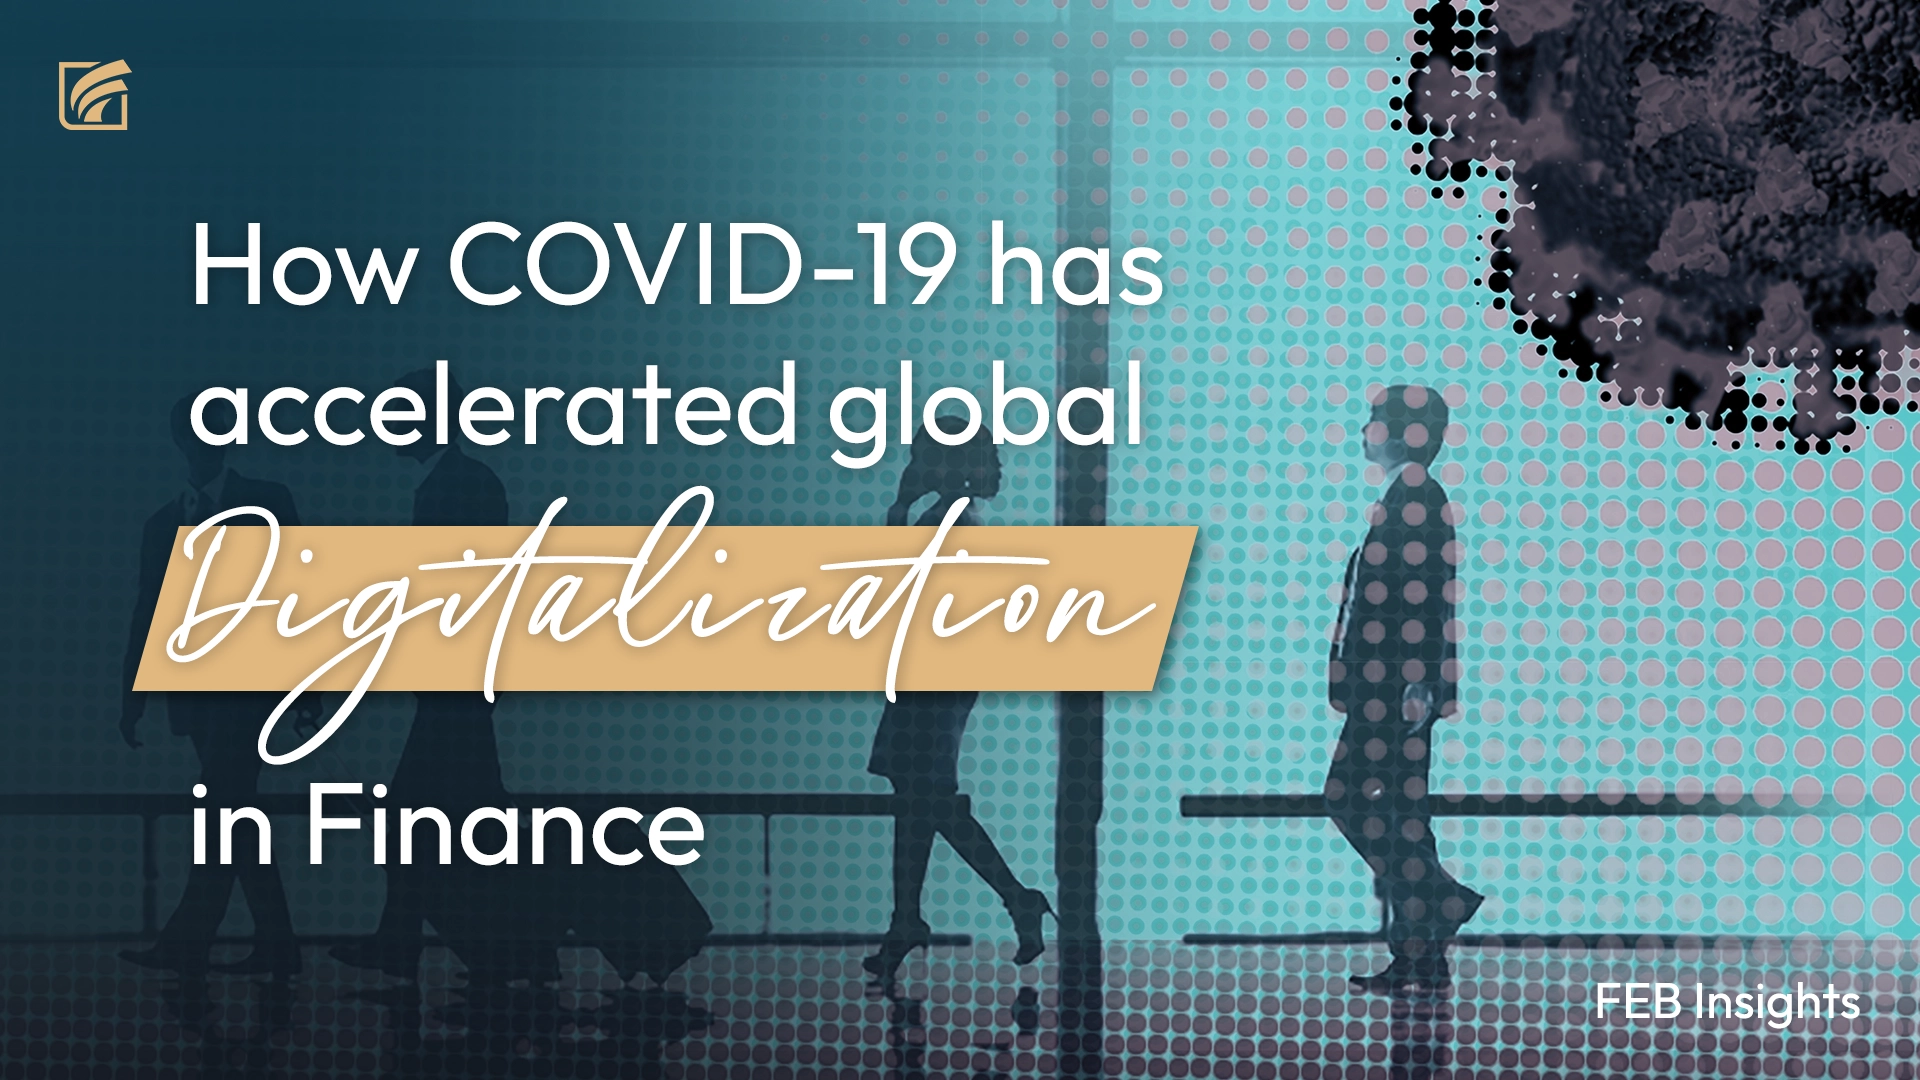 How COVID-19 has accelerated global digitalization in Finance